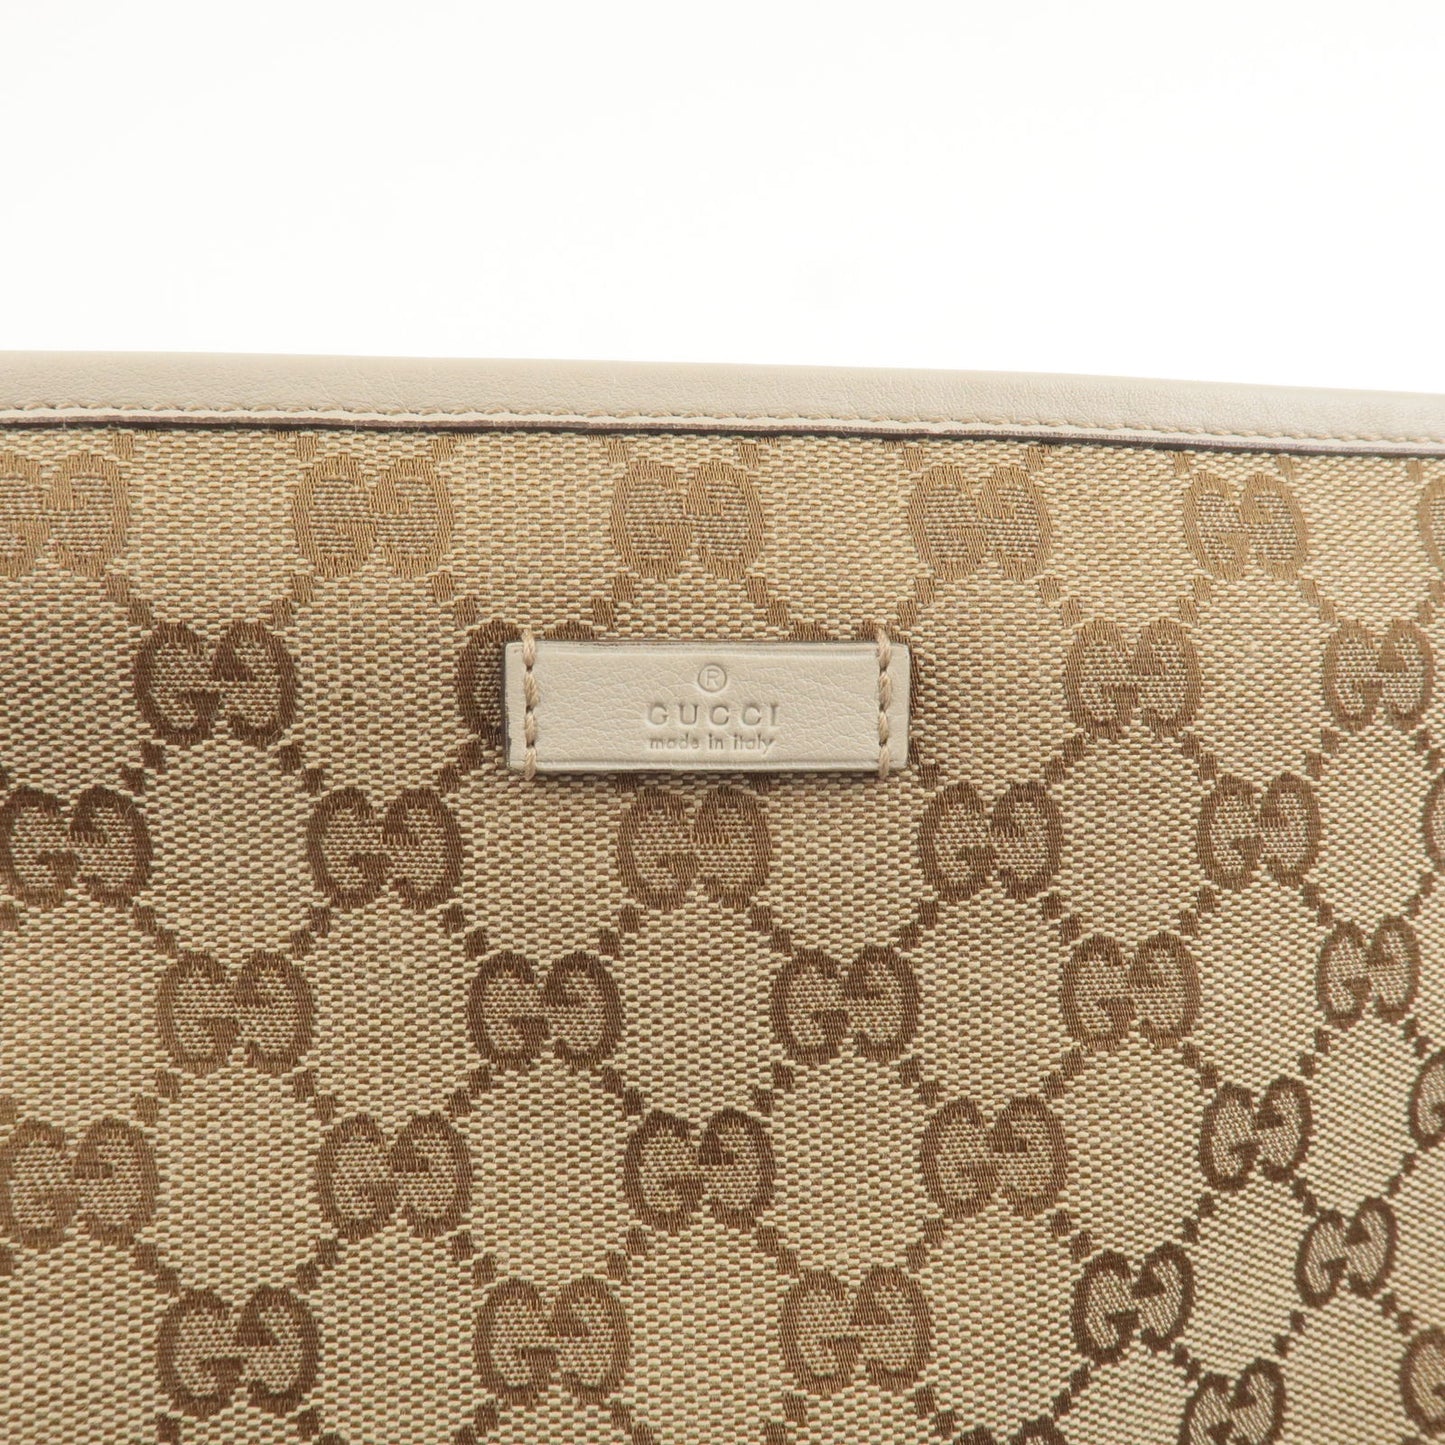 GUCCI GG Canvas Leather Shouler Bag Beige Brown 388924